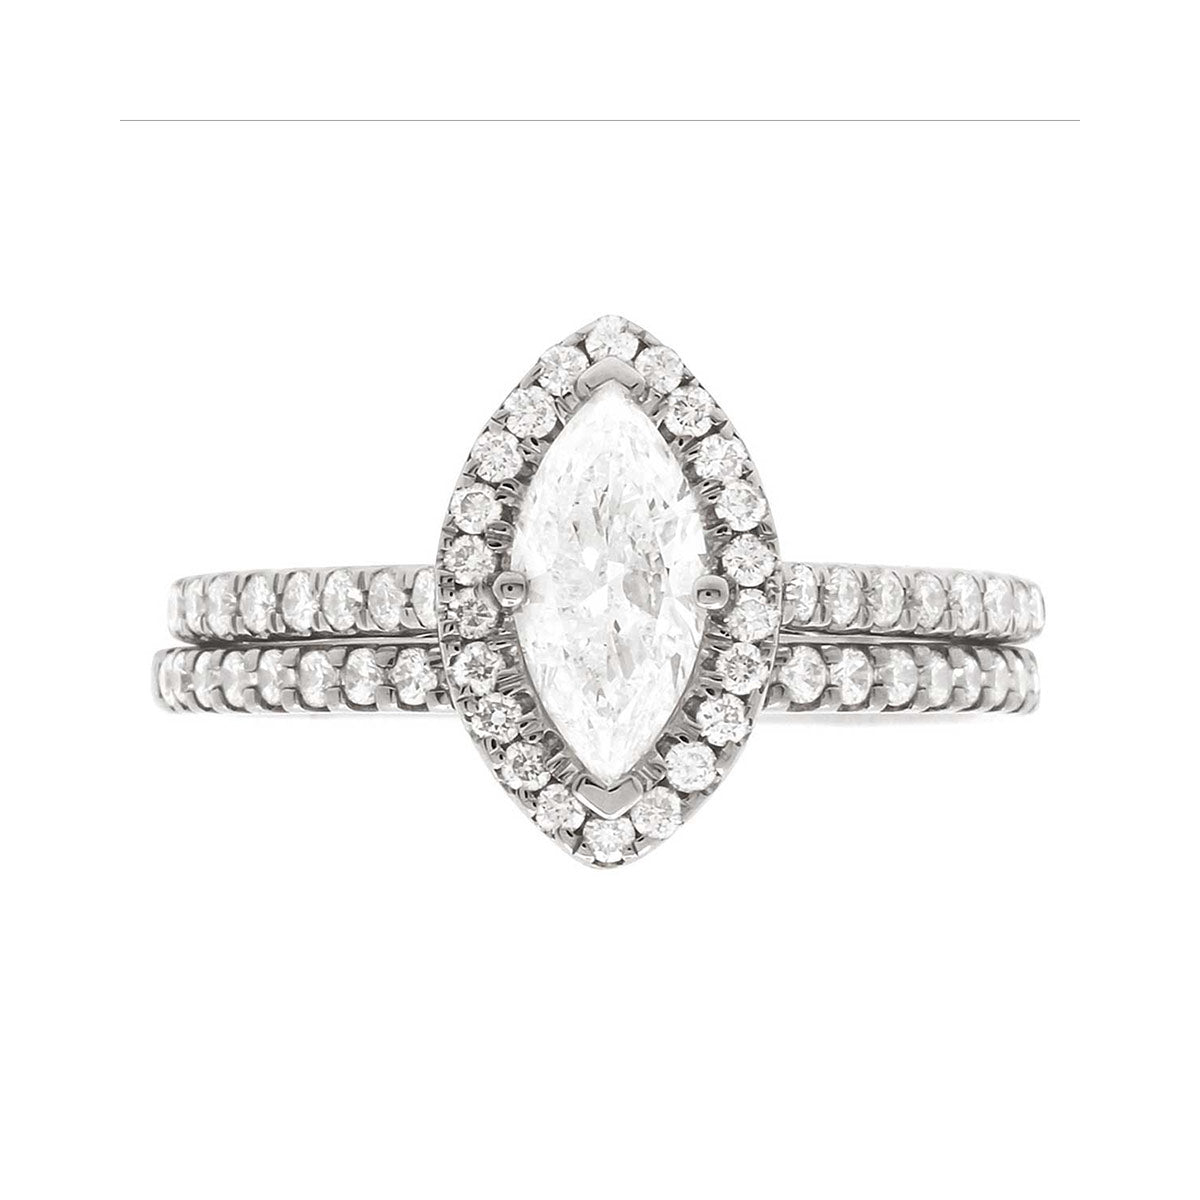 Marquise Halo Engagement Ring in white gold pictured with a diamond set wedding ring